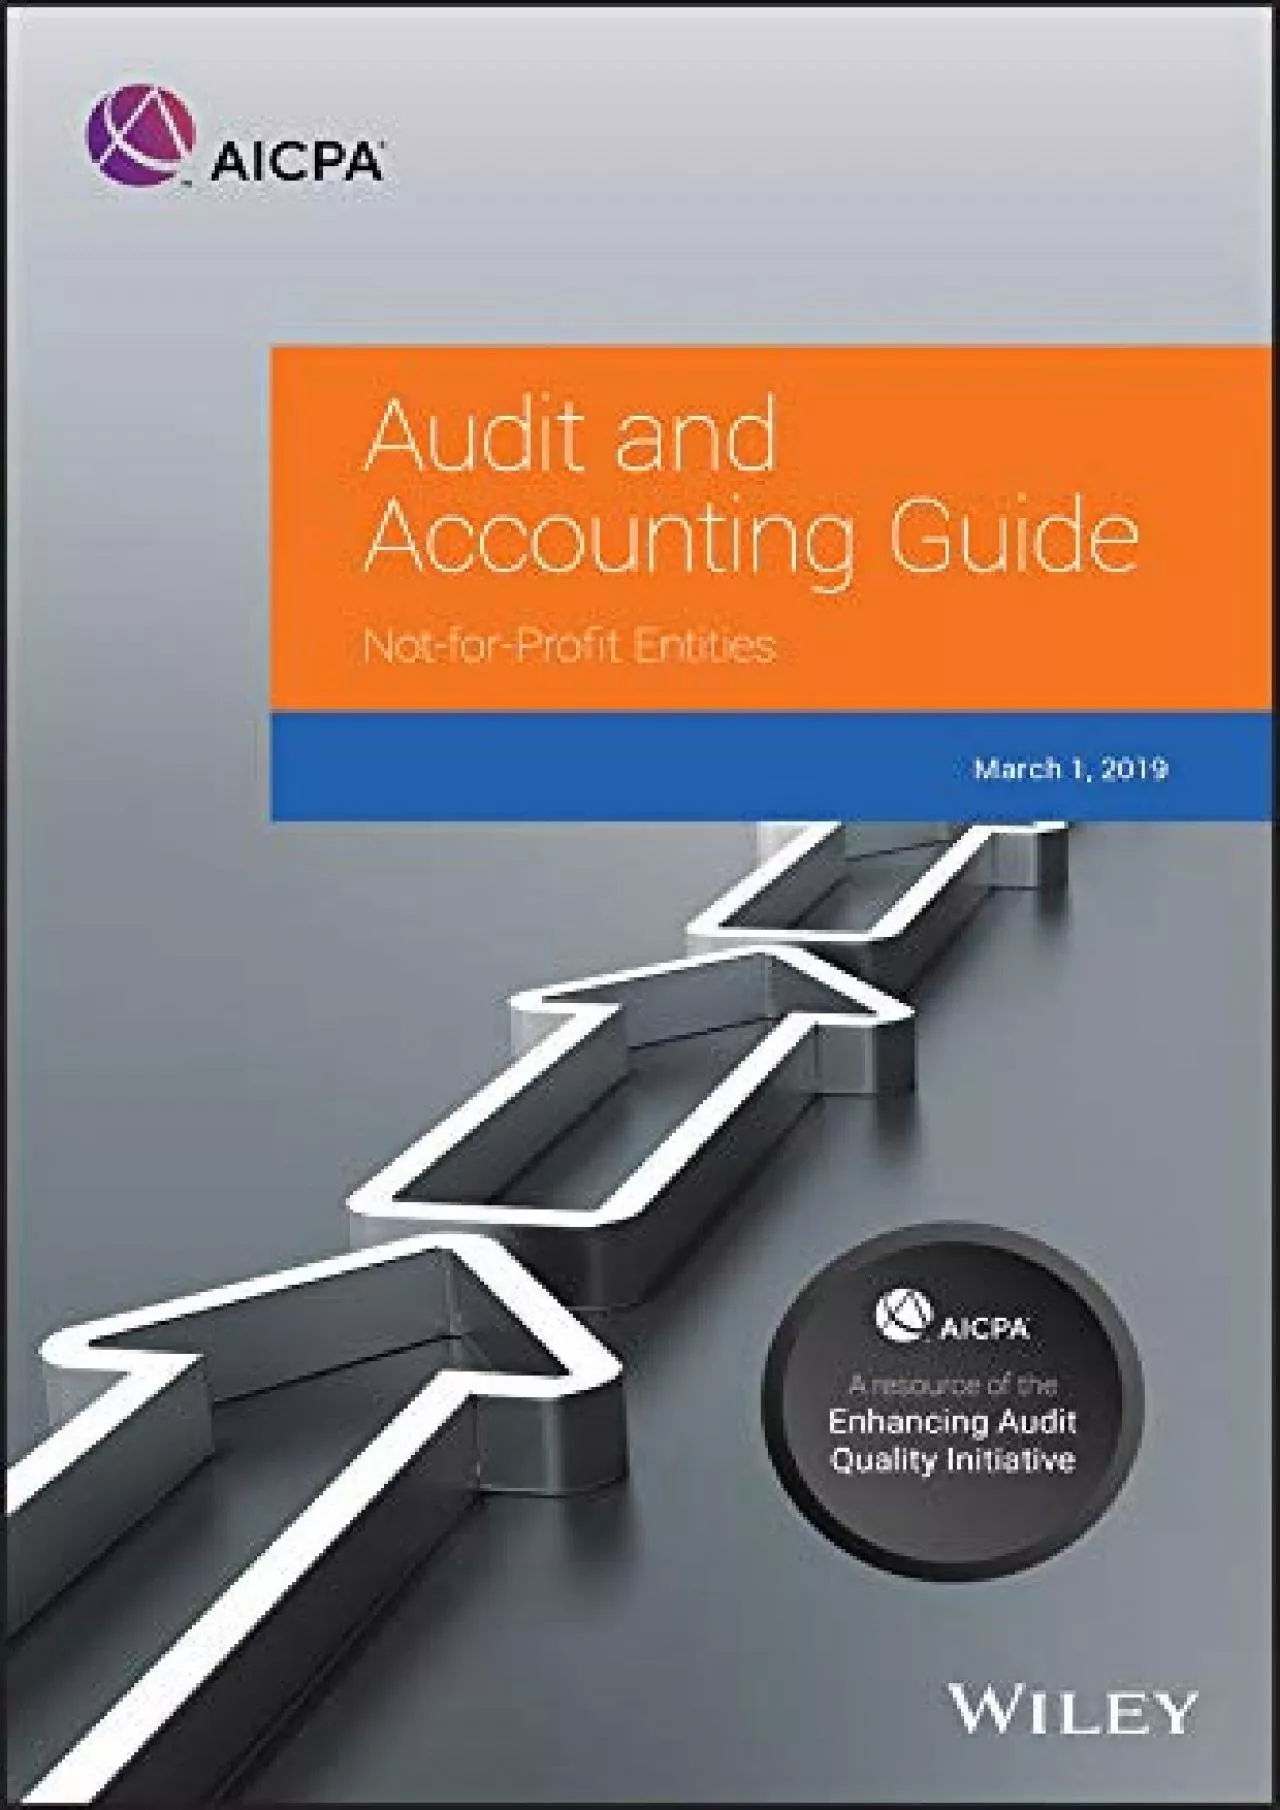 (BOOK)-Auditing and Accounting Guide: Not-for-Profit Entities, 2019 (AICPA Audit and Accounting